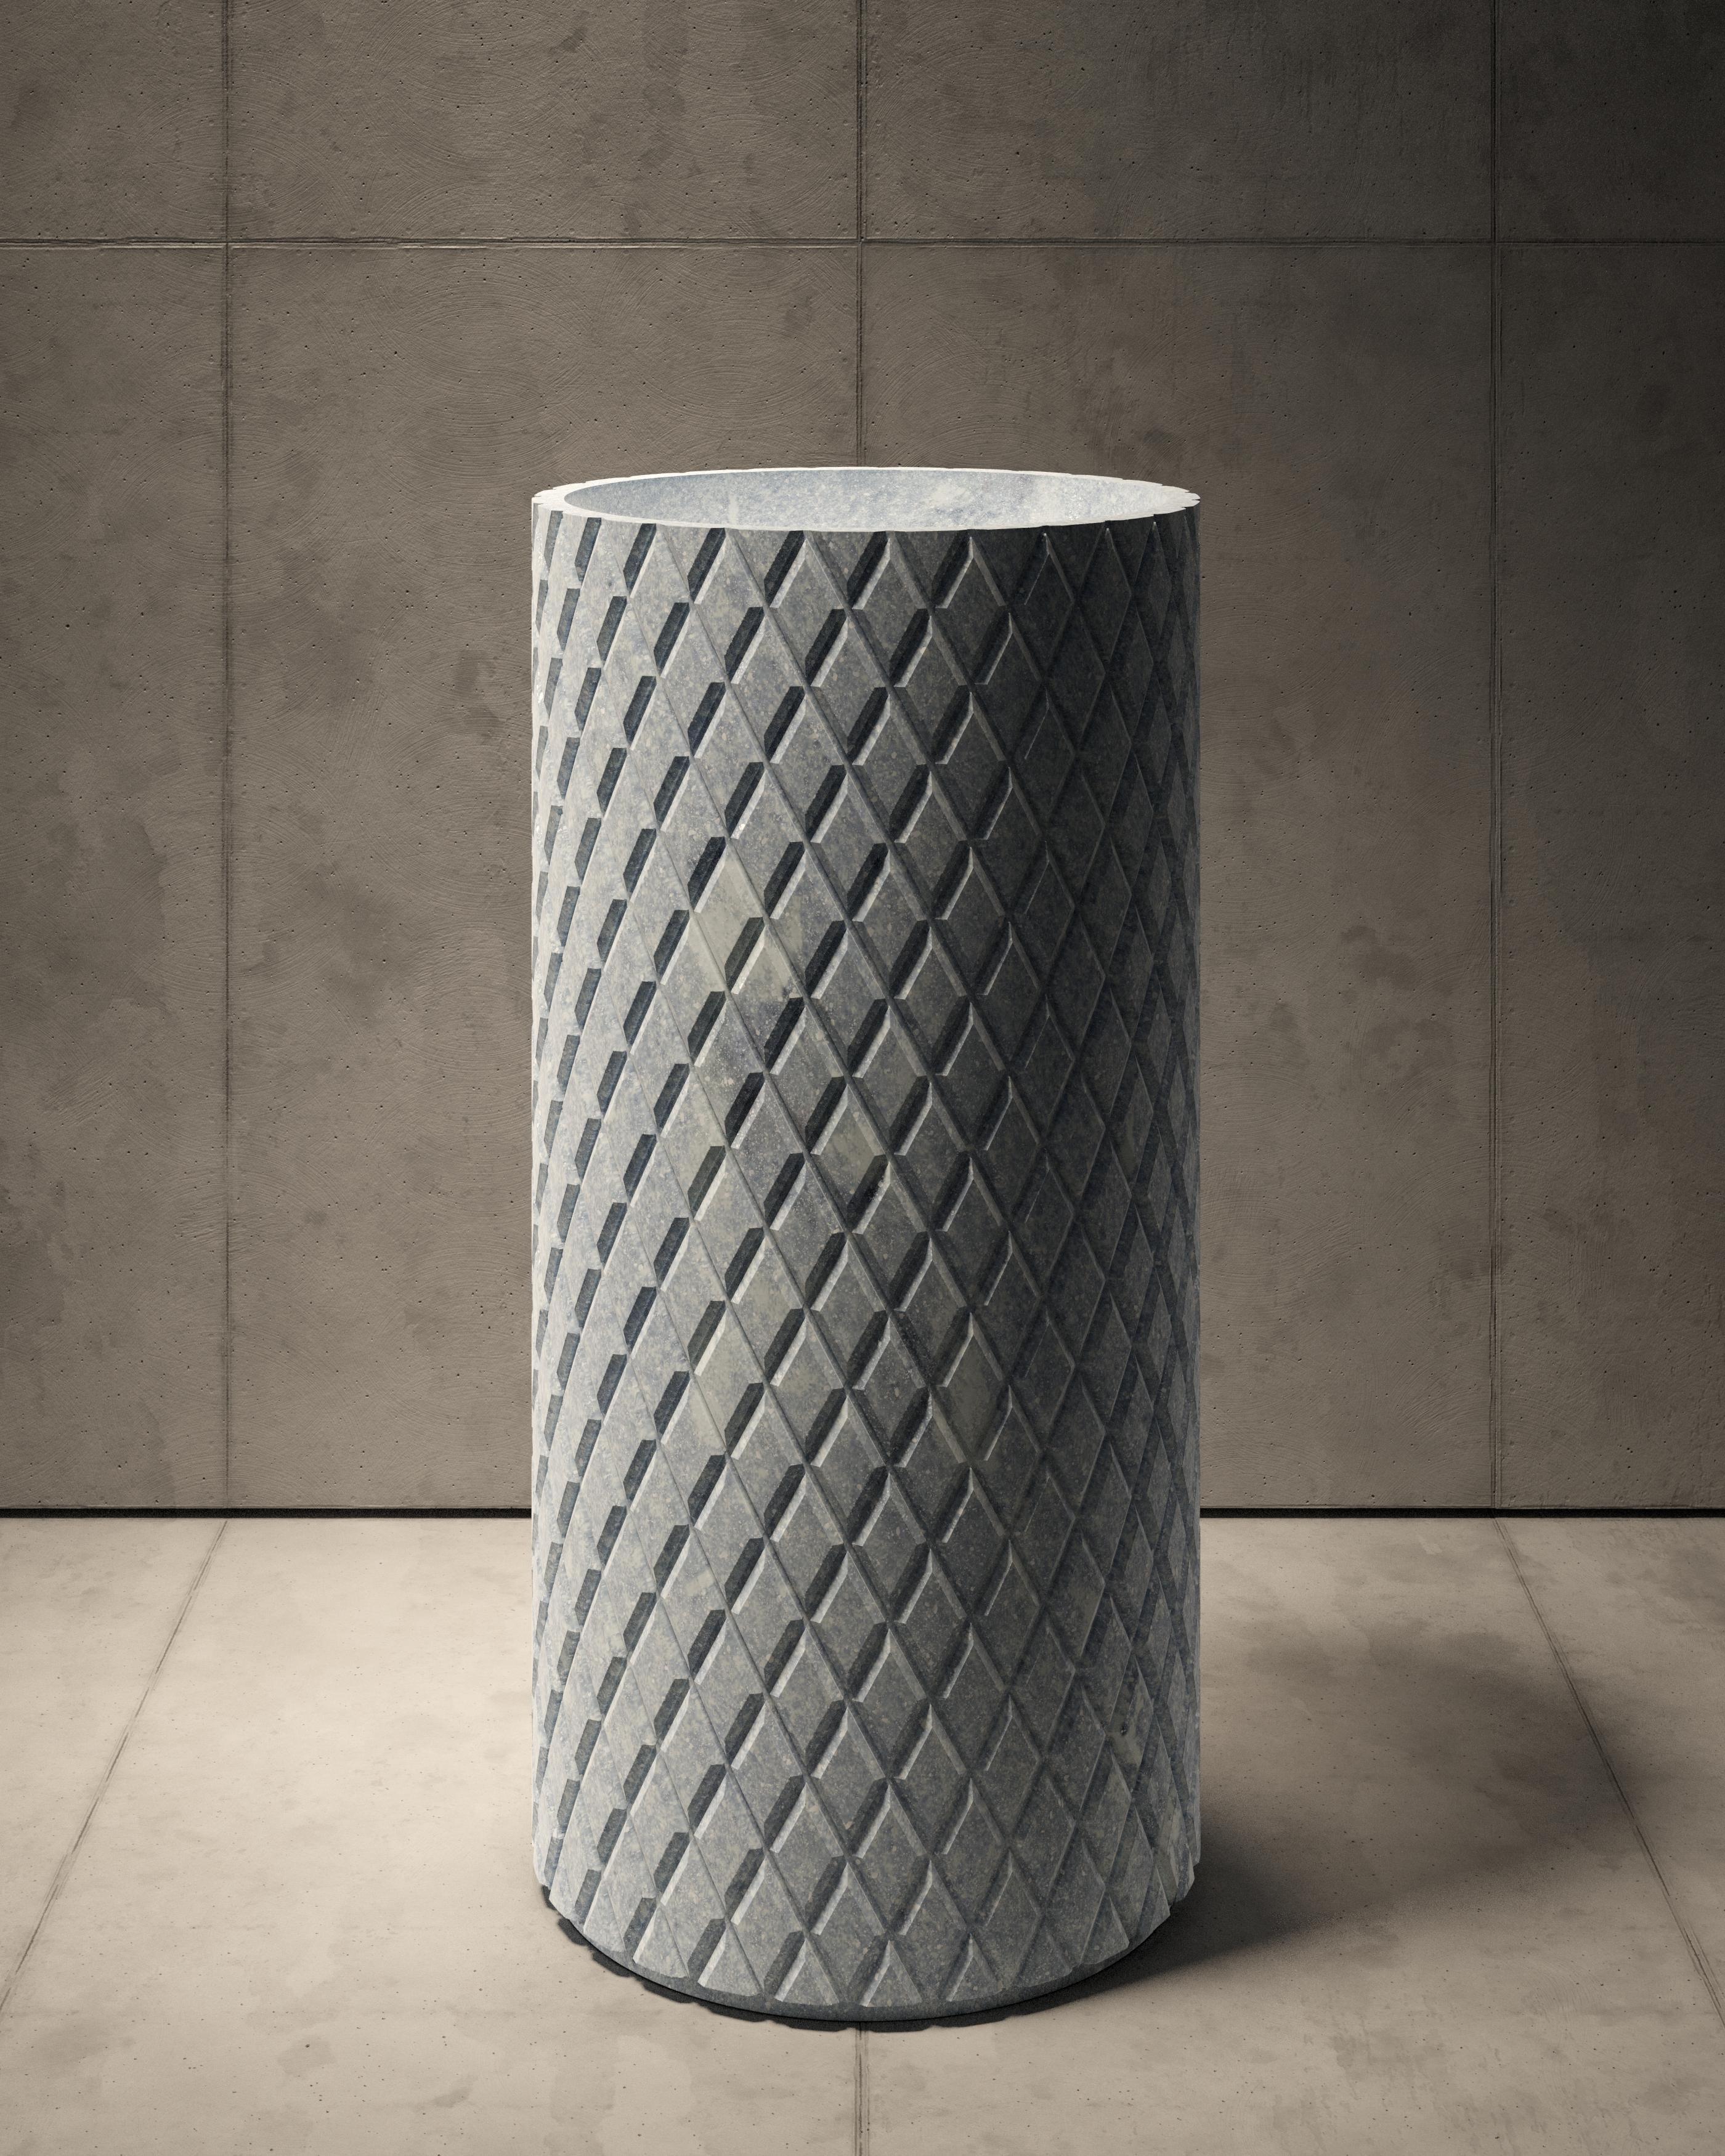 The Diamont pedestal made of marble is fully customizable.